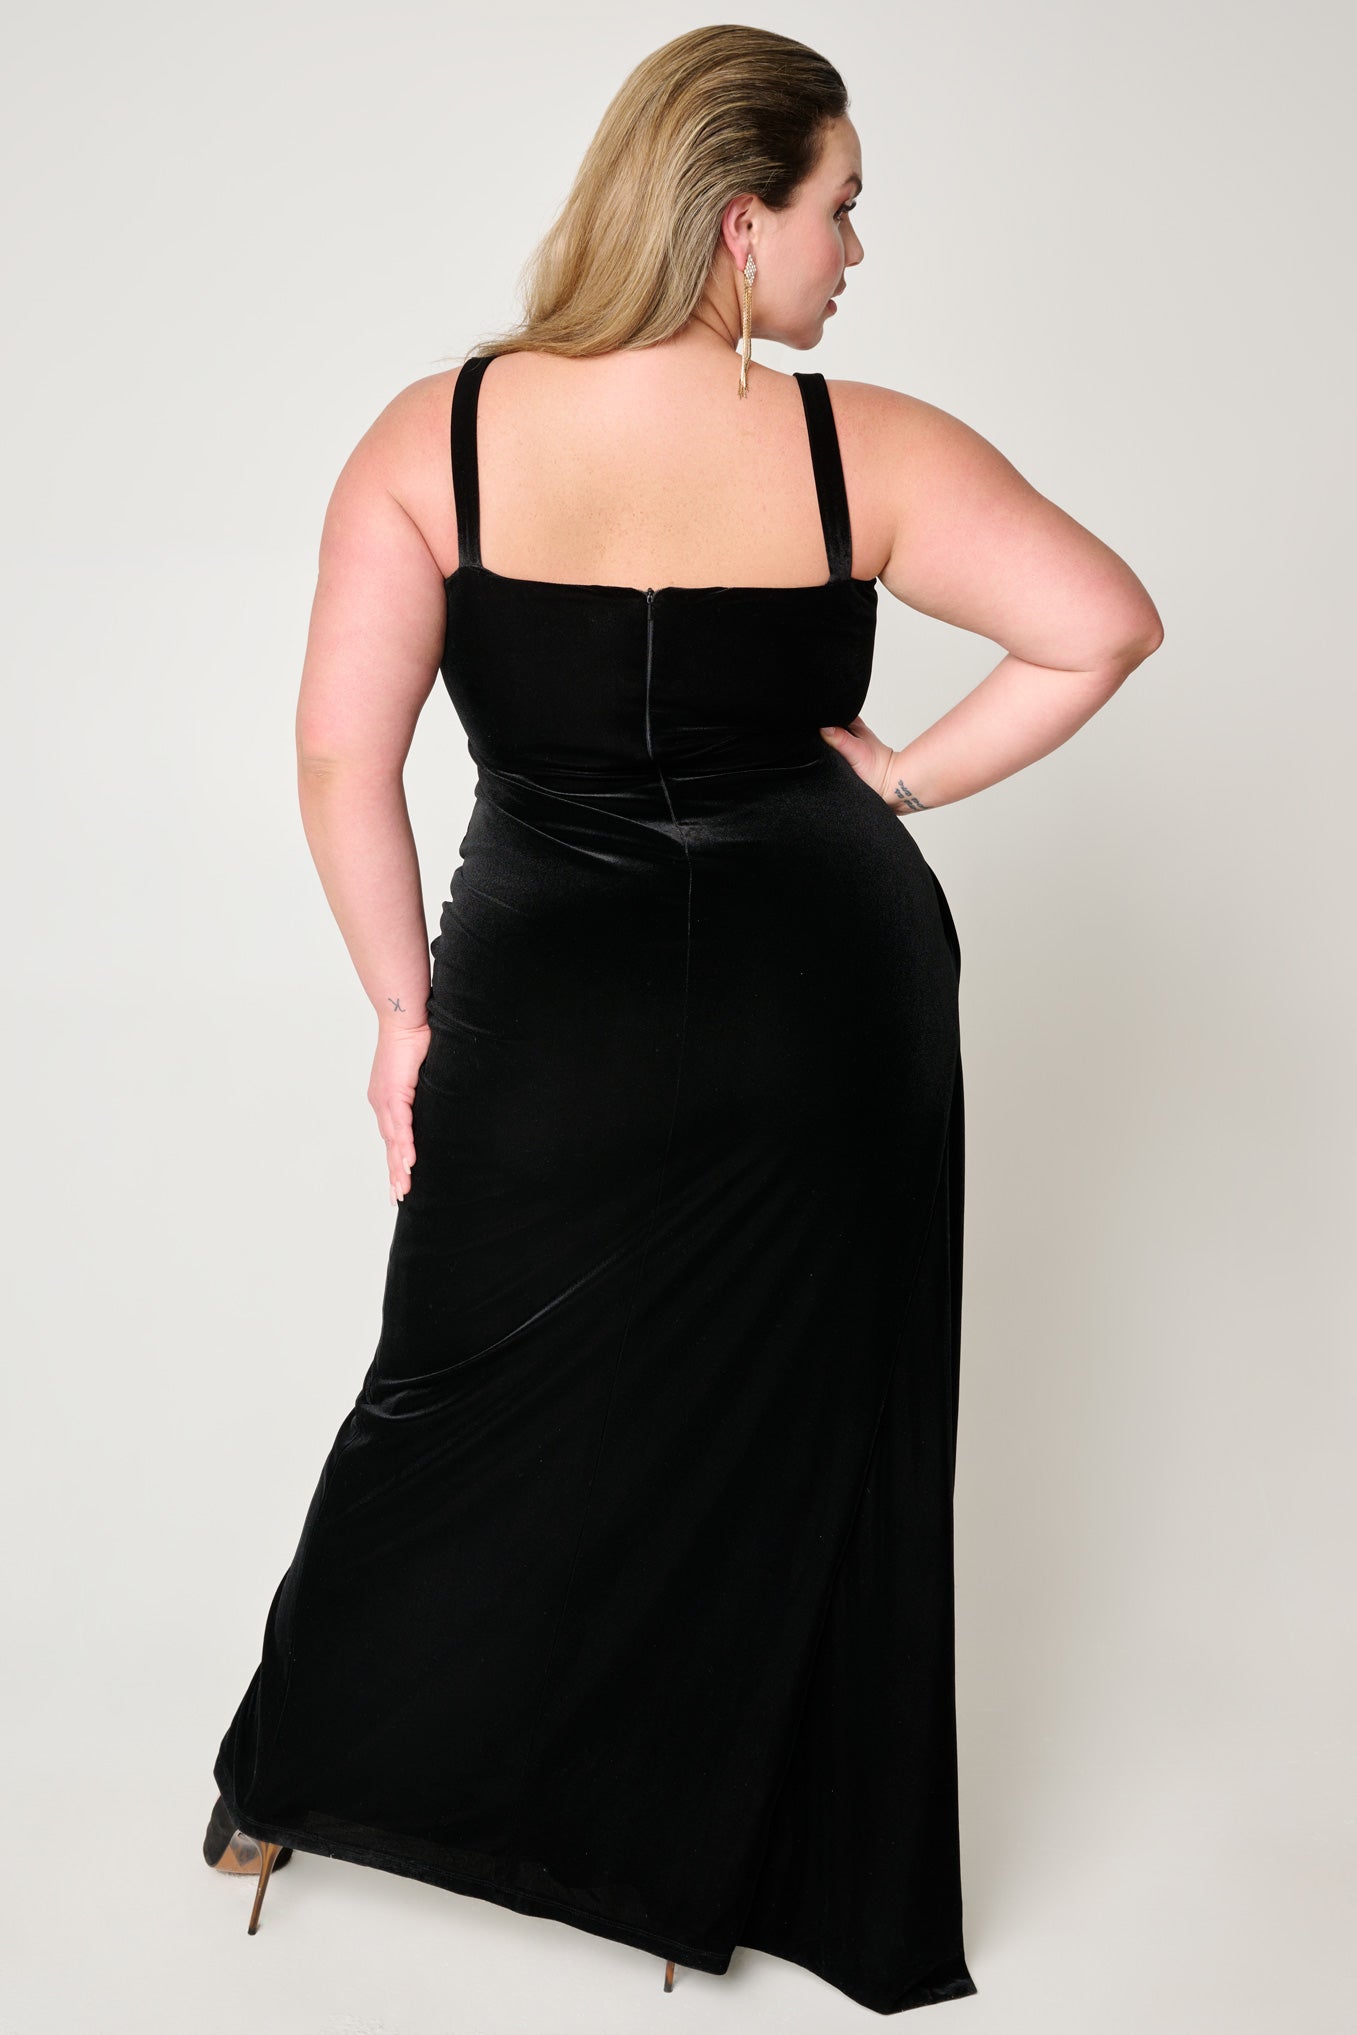 Domino Gown in Black by Black Halo - RENTAL